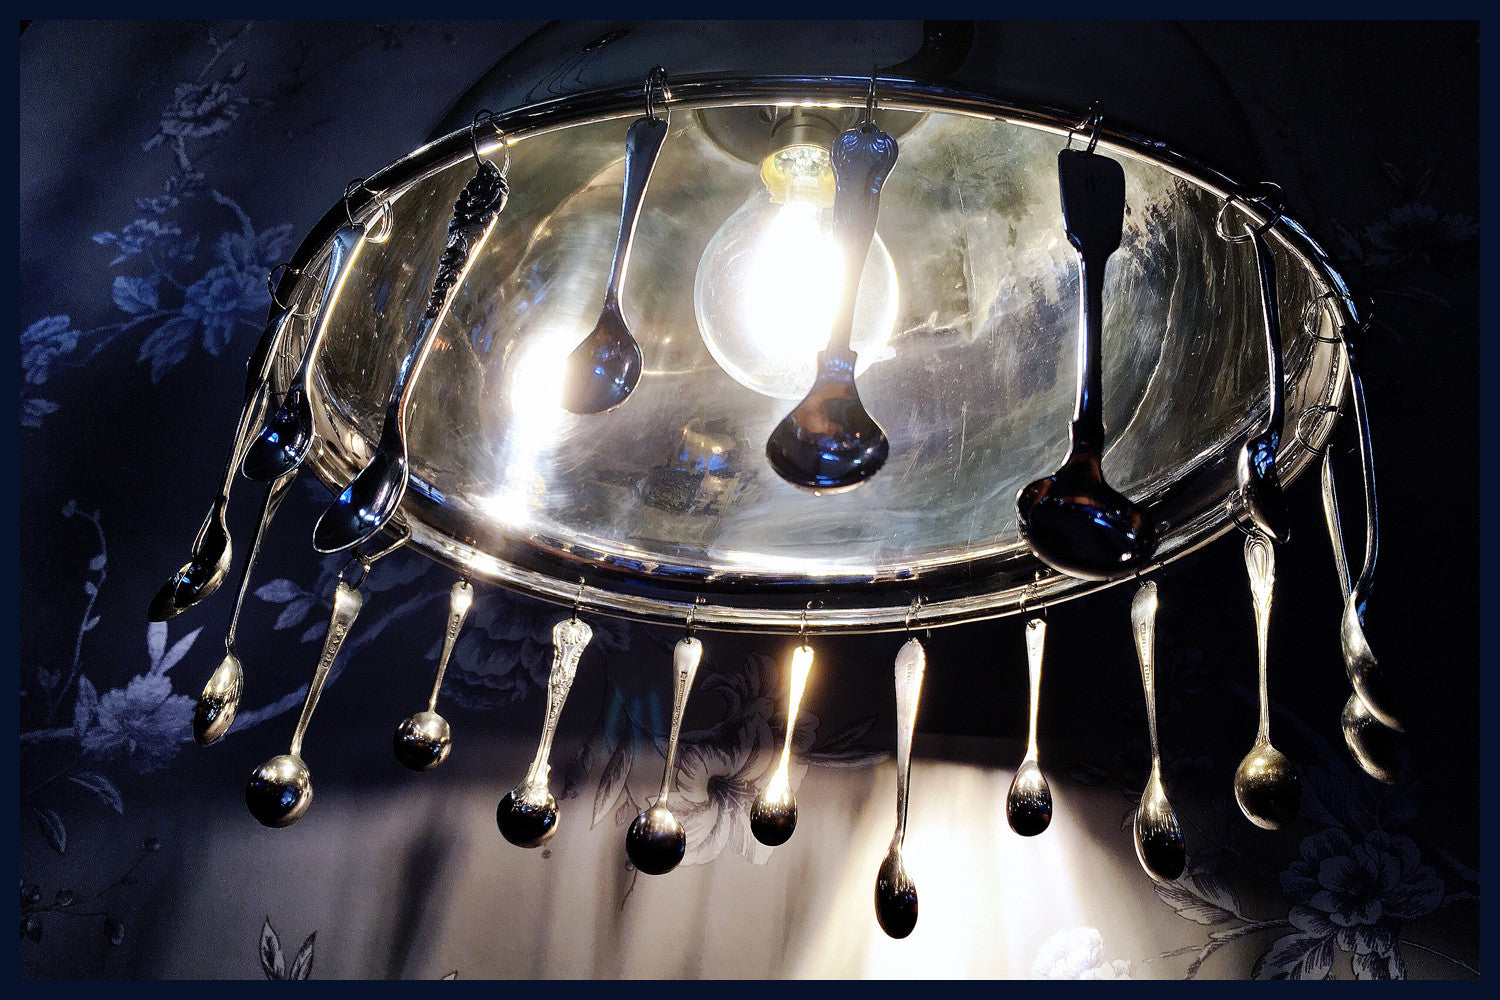 Antique Silver-Plated Food Dome/Cloche Chandelier with Antique Salt & Mustard Spoons - Grace (92)